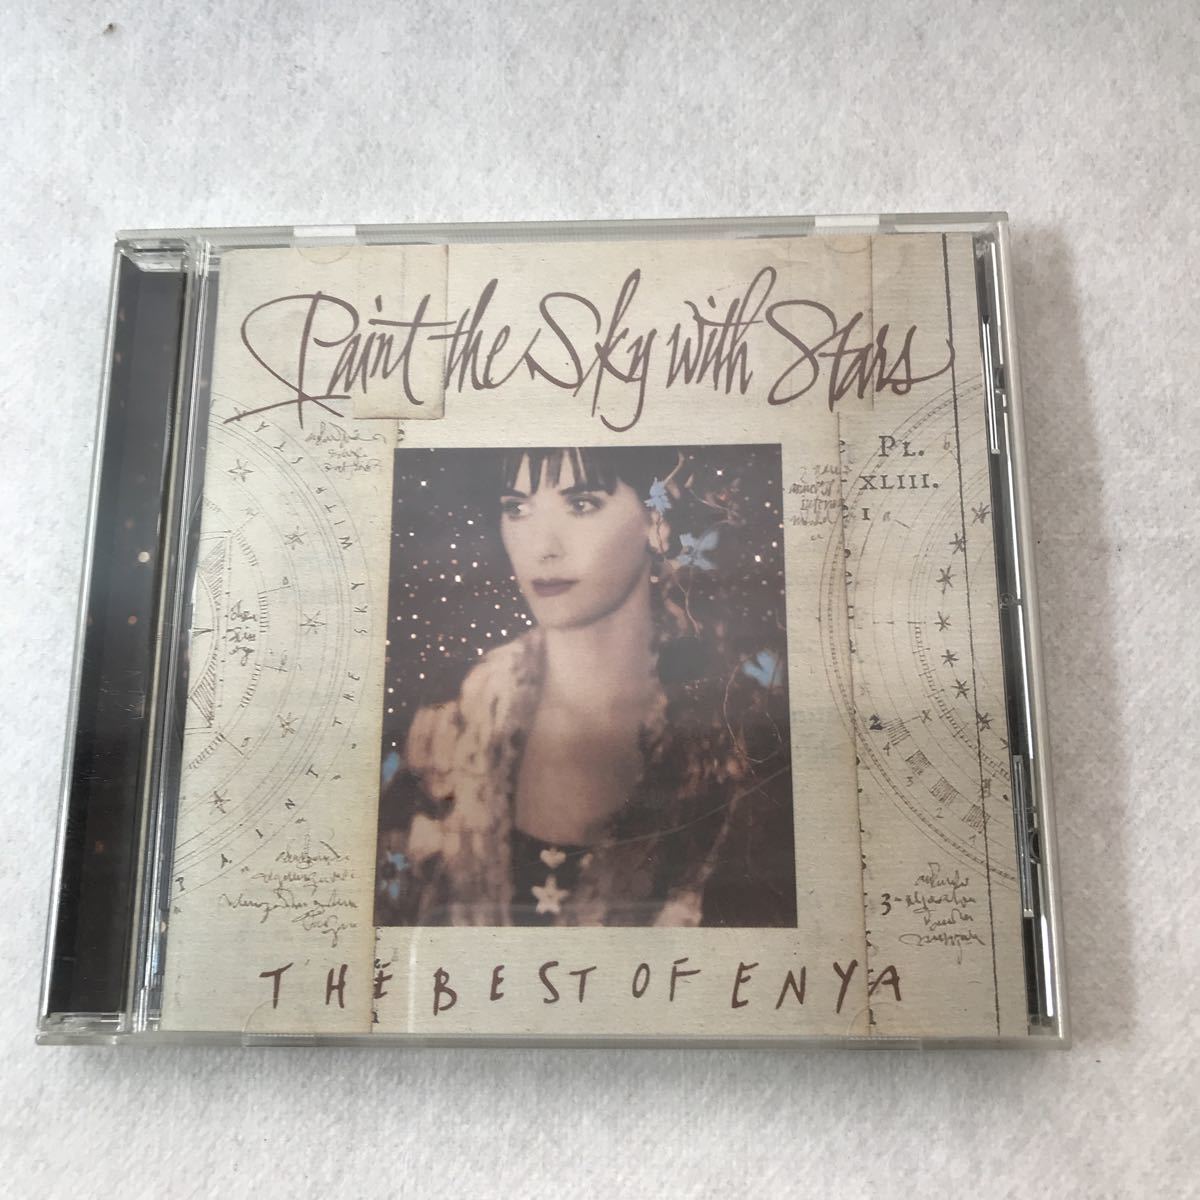 CD Paint the Sky The Best of Enya